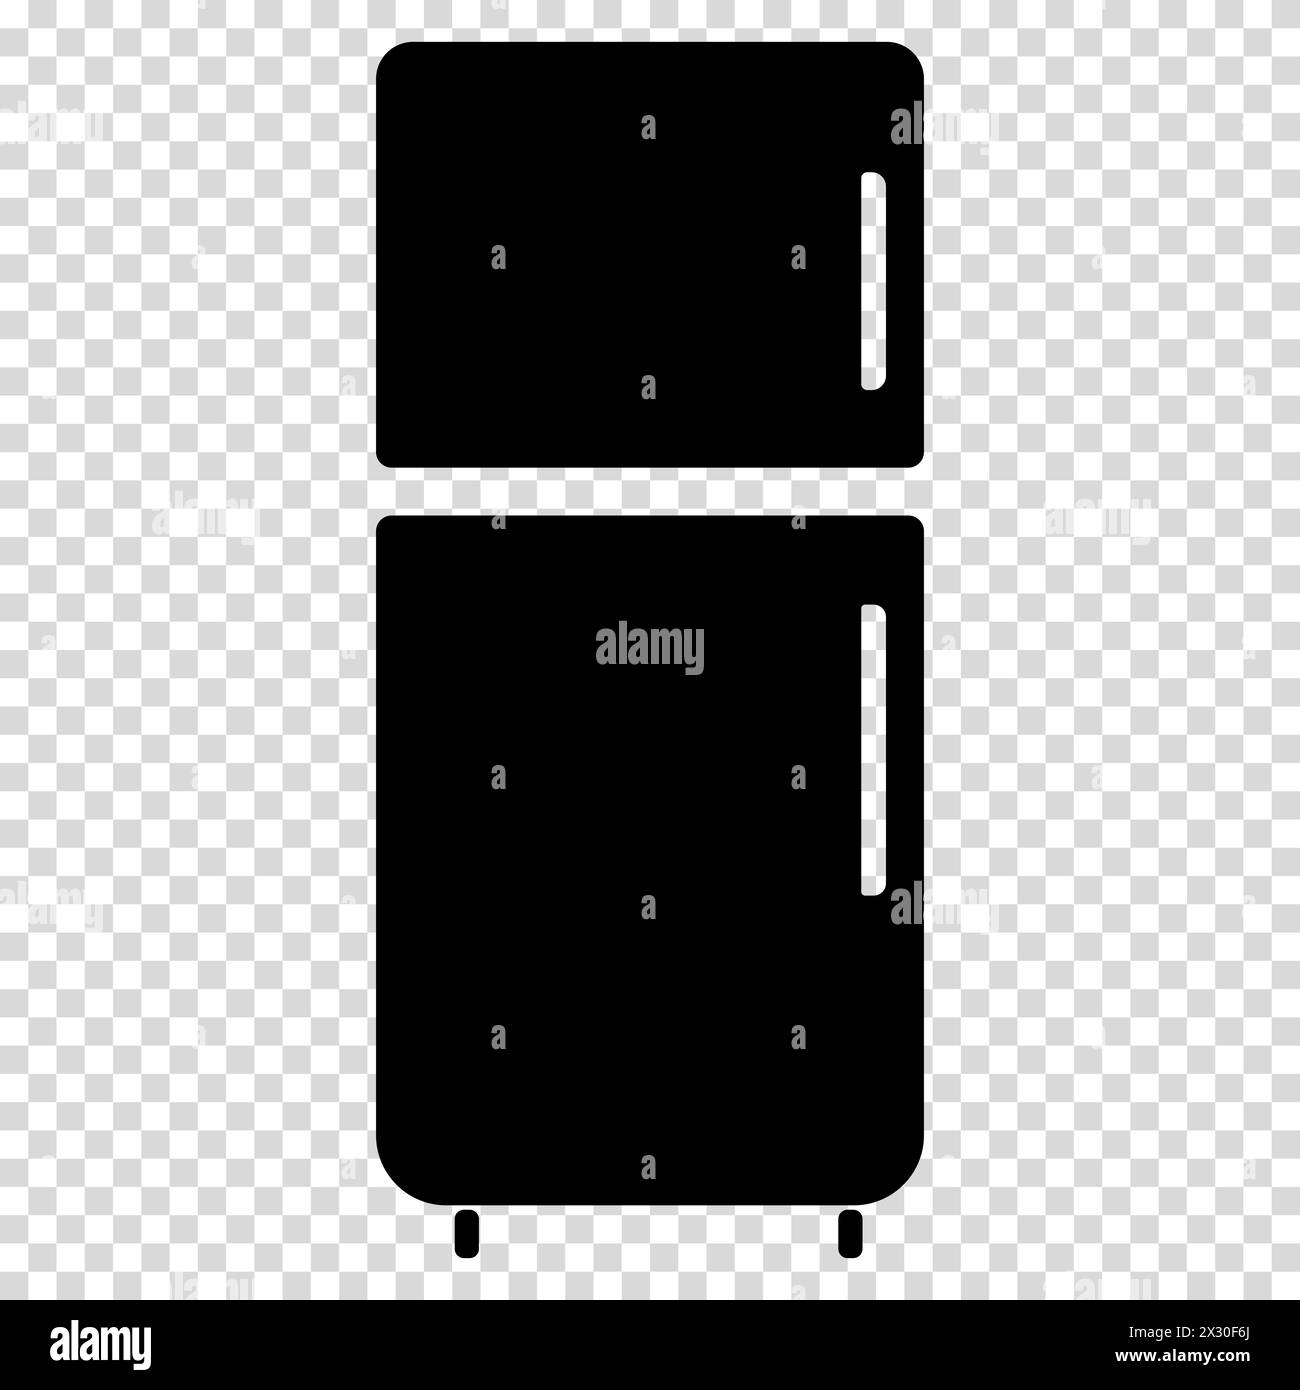 Completely black refrigerator with white handles, food storage, home appliances, flat design, simple image, cartoon style. Vector line icon for busine Stock Vector